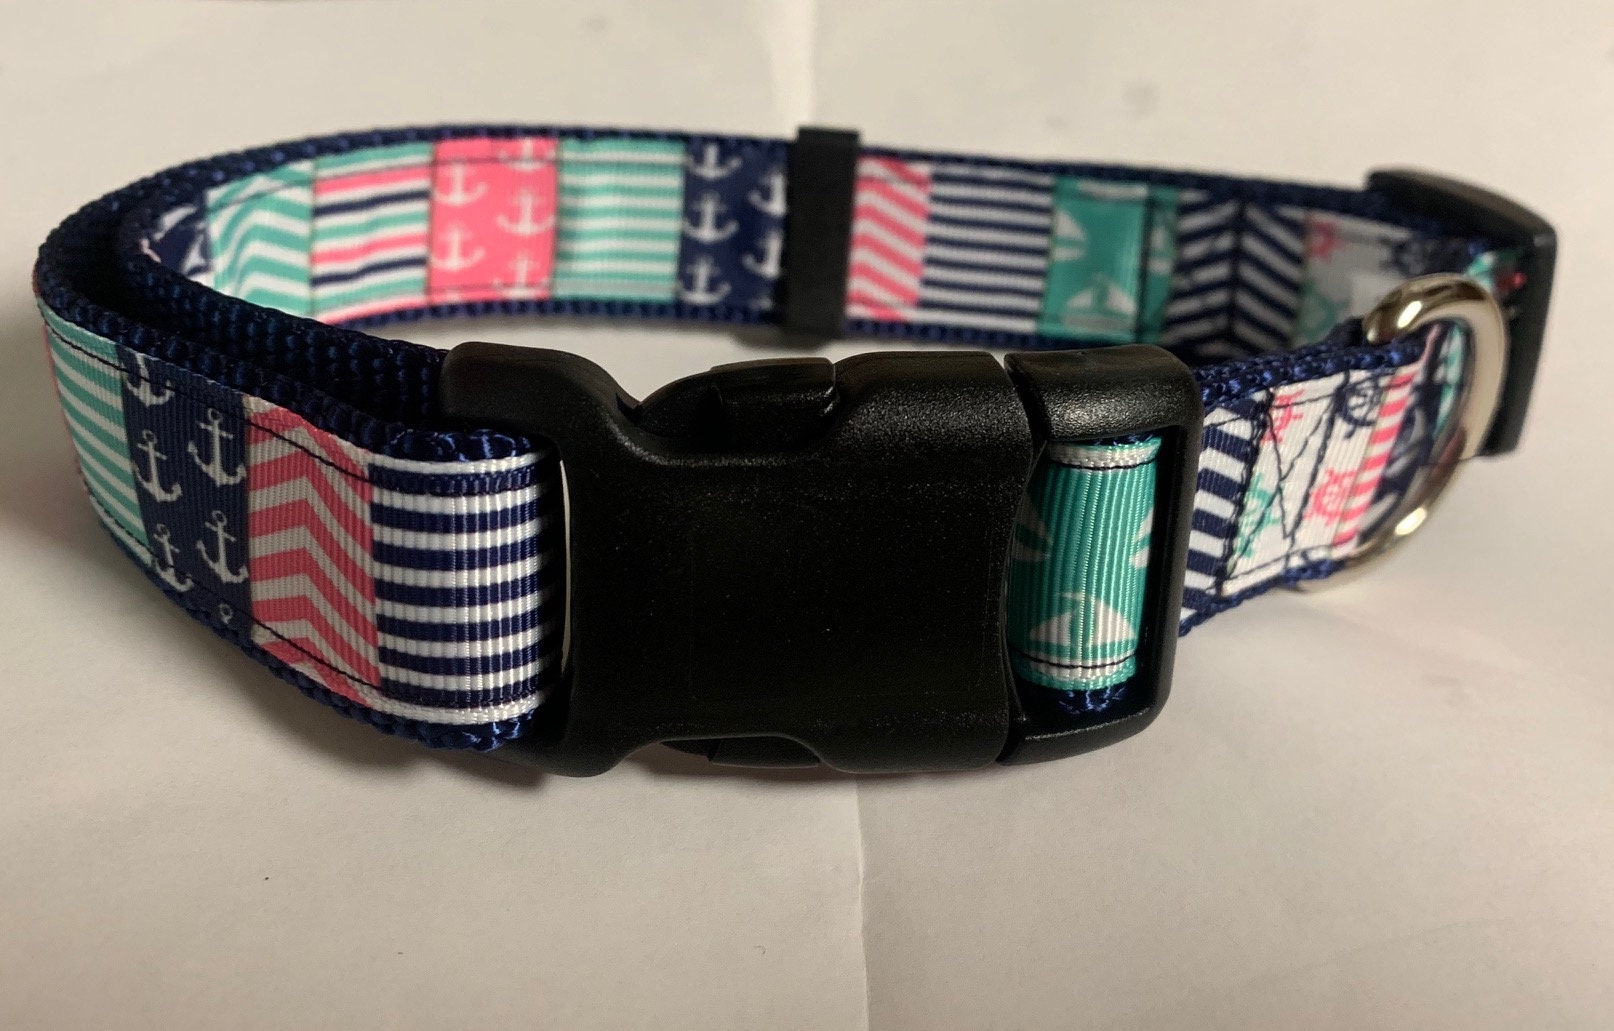 Dog Leash Set - Patterned Dog Collar Set, Matching Dog Collar and Lead, Made in The USA - 3/4 inch Wide Adjusts to 8.5-12.5 Inches, Small, Blue Plaid